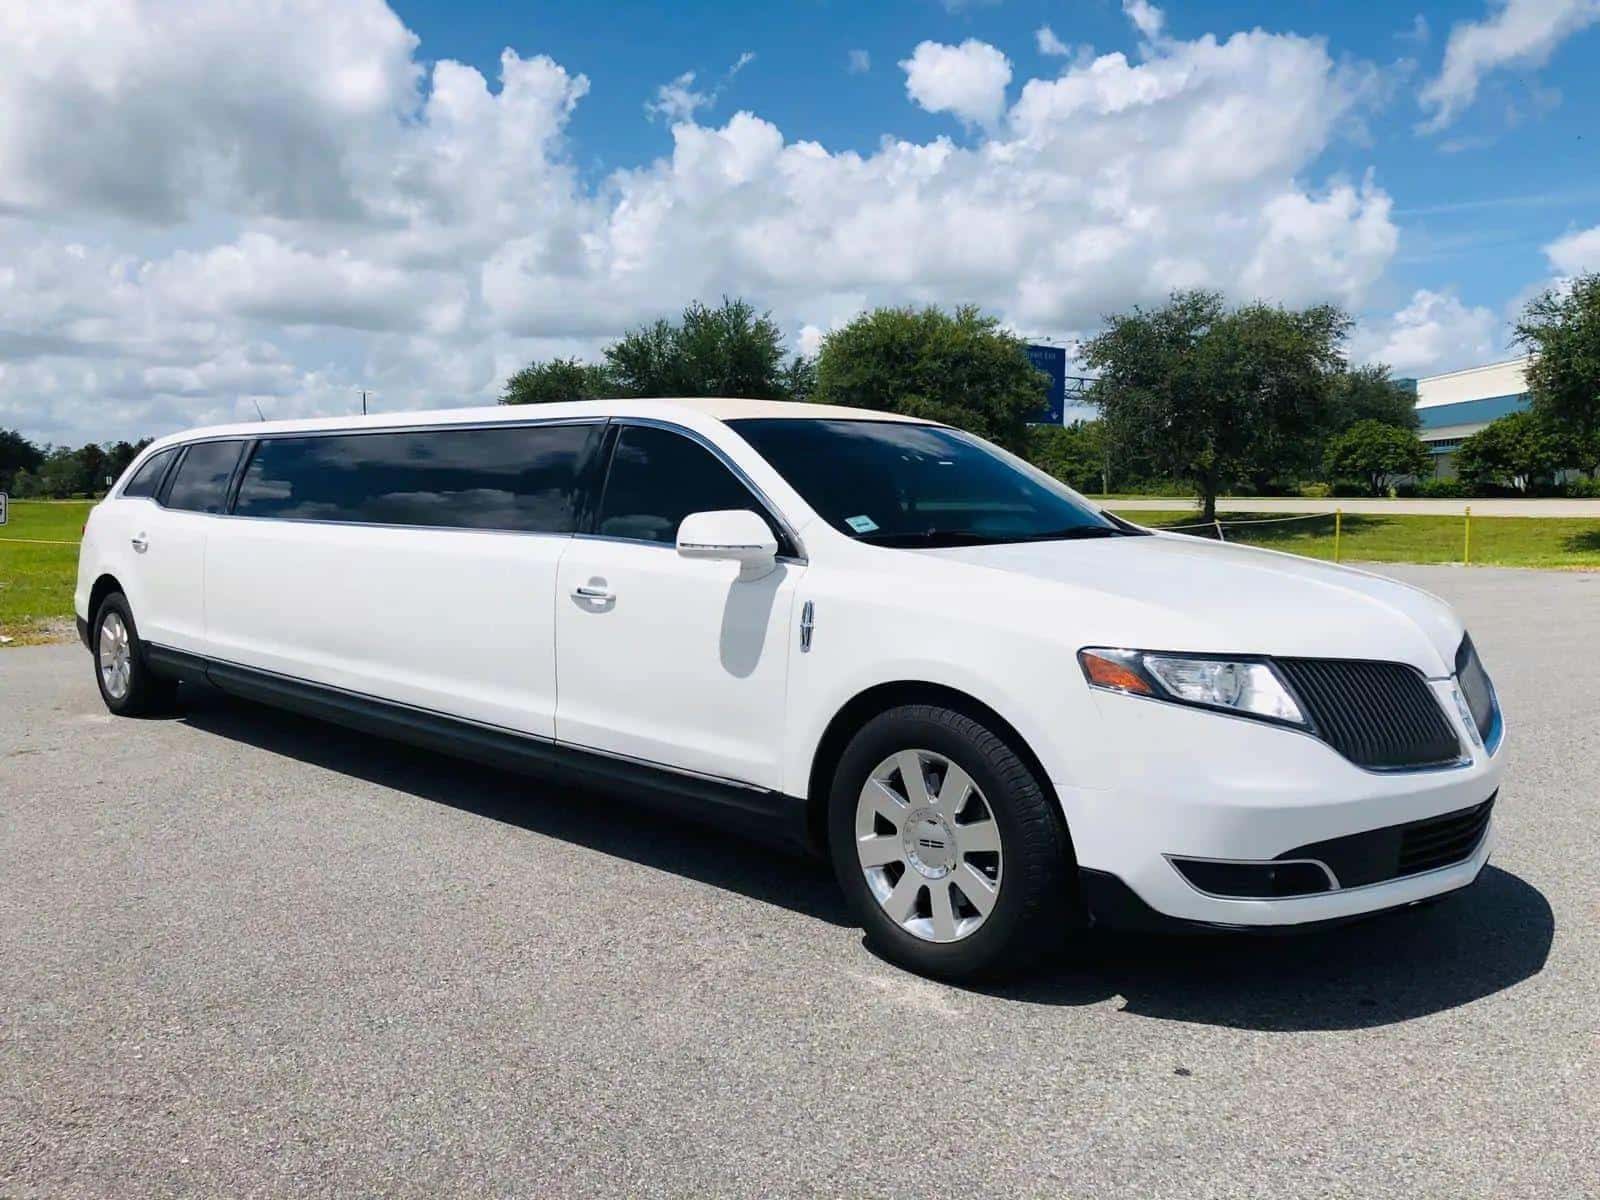 Limo Services in Chicago